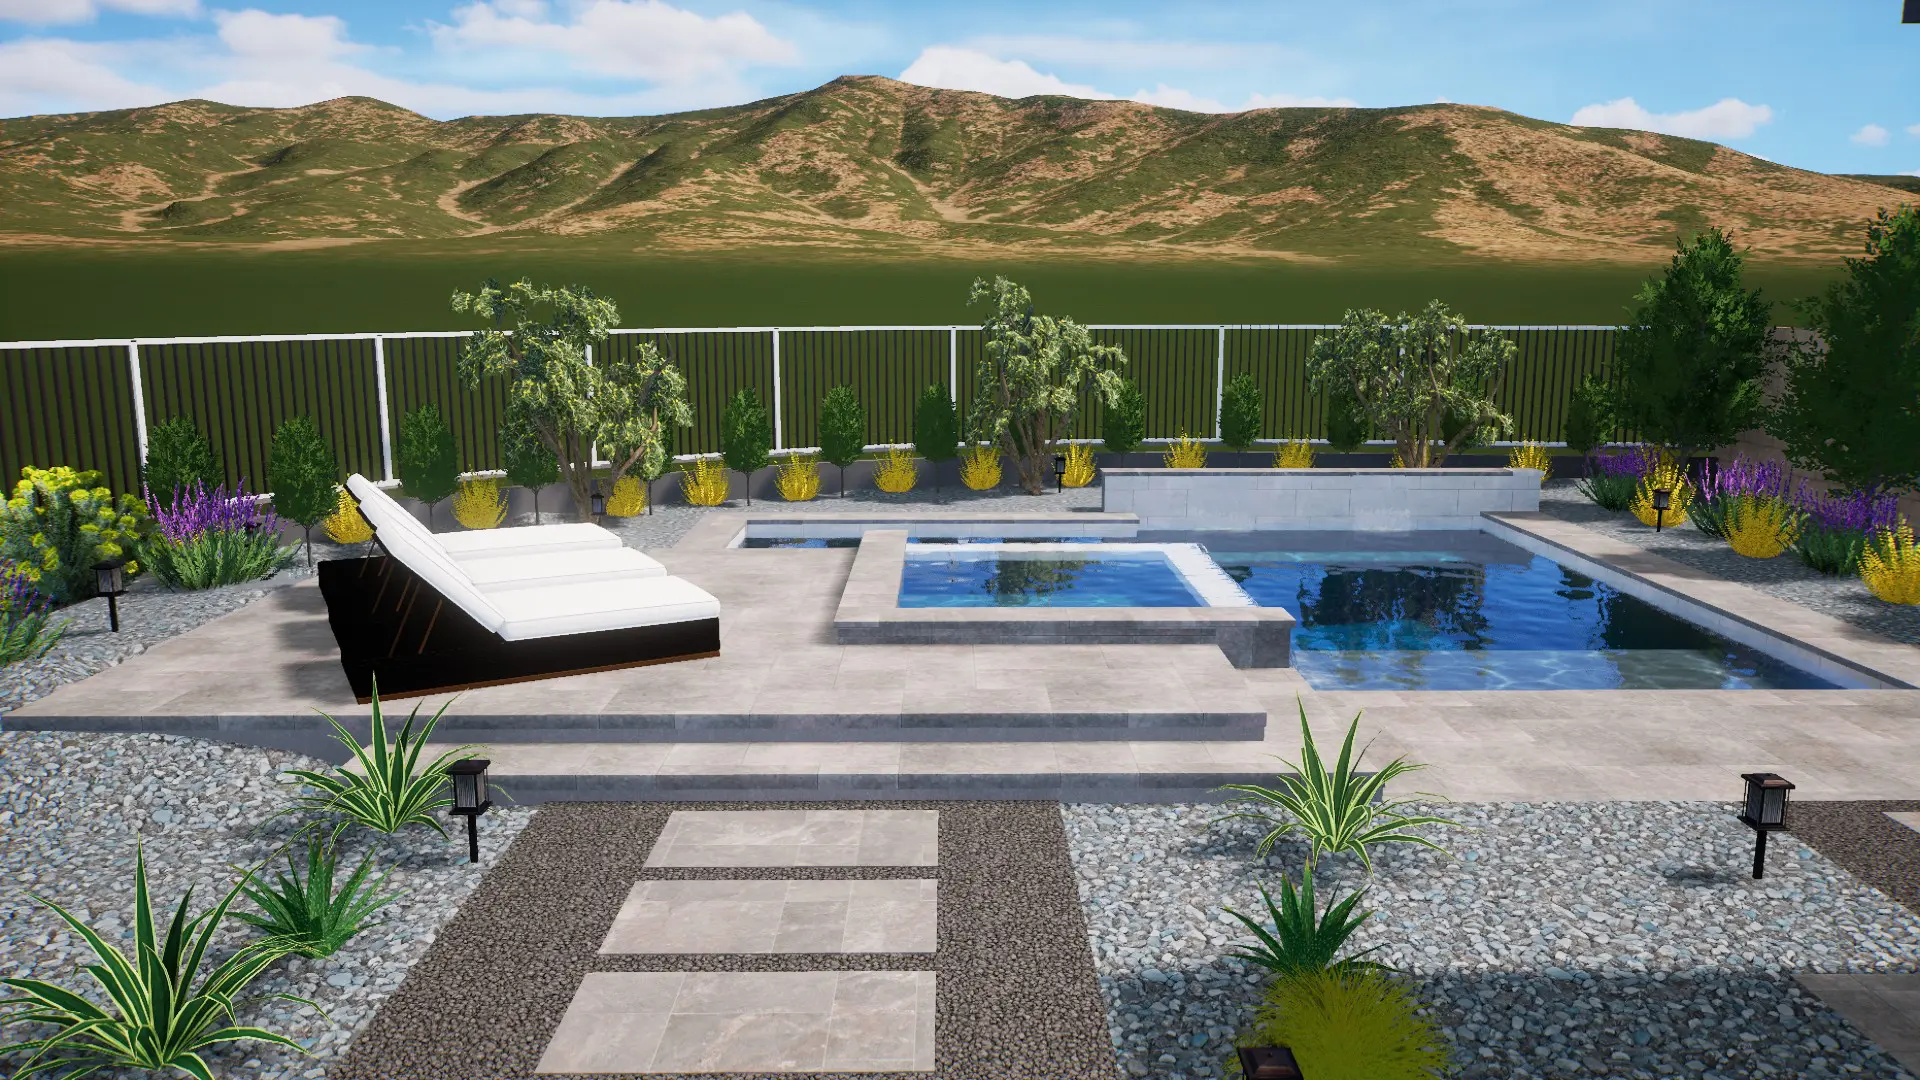 A rendering of the outdoor area with a pool and spa.